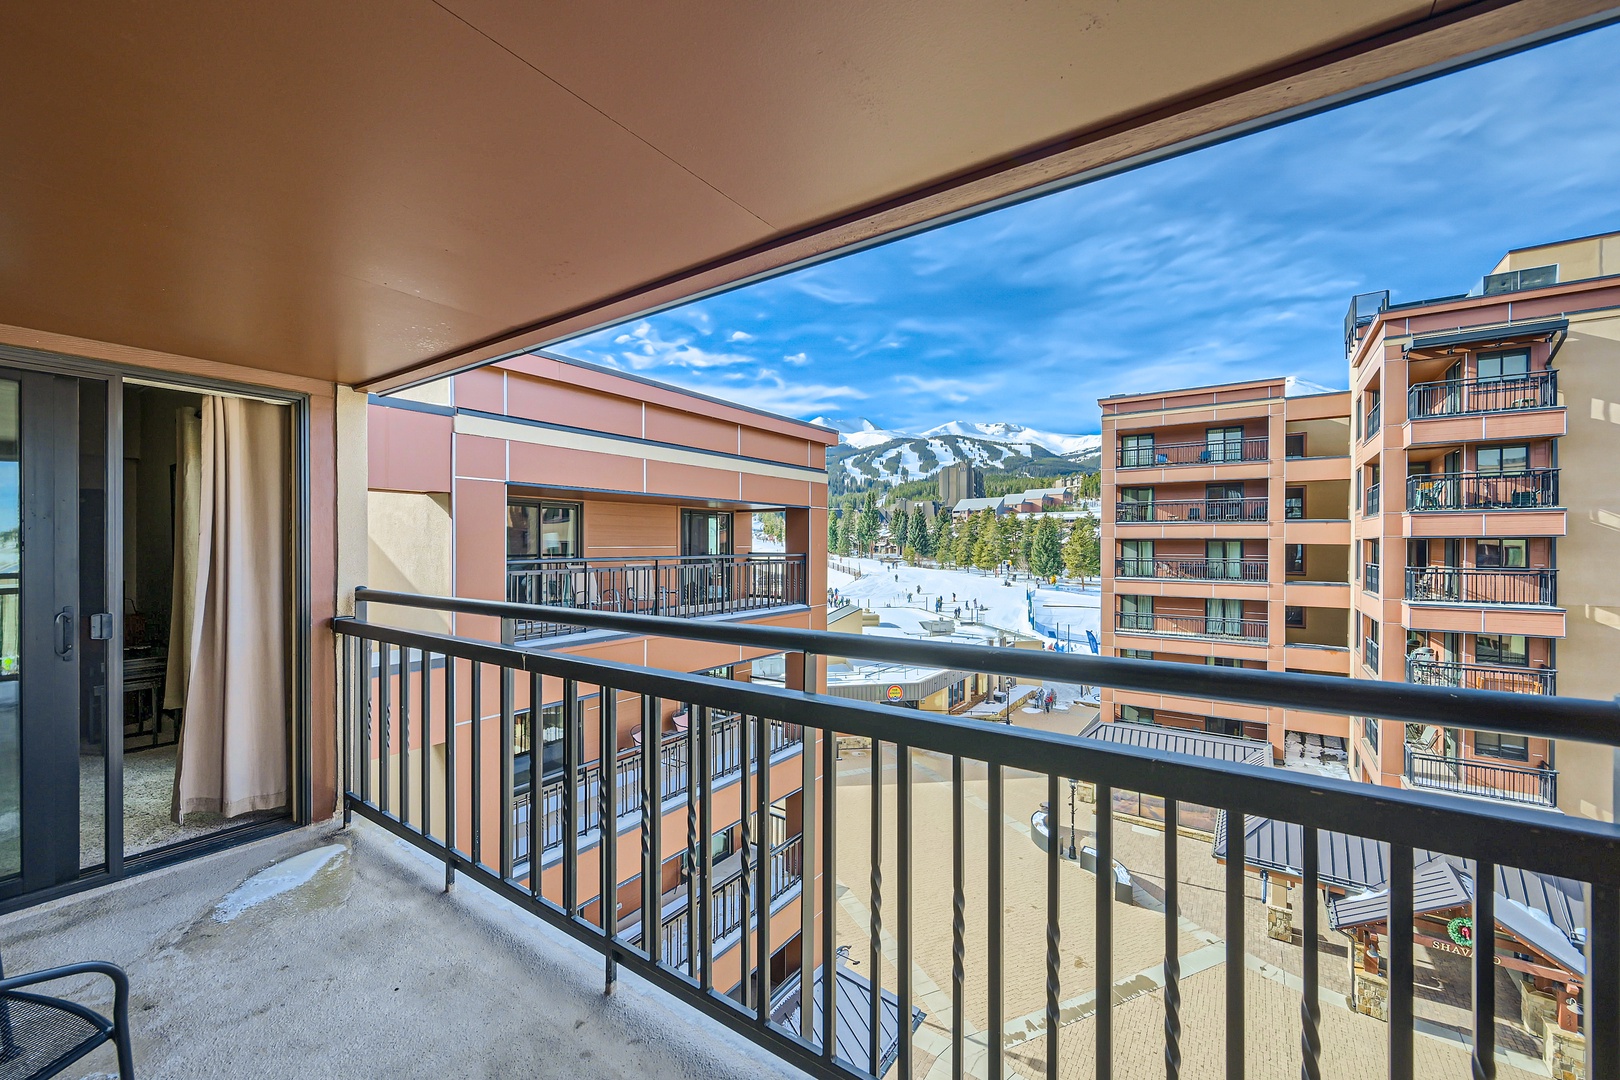 Savor spectacular mountain vistas from your private balcony